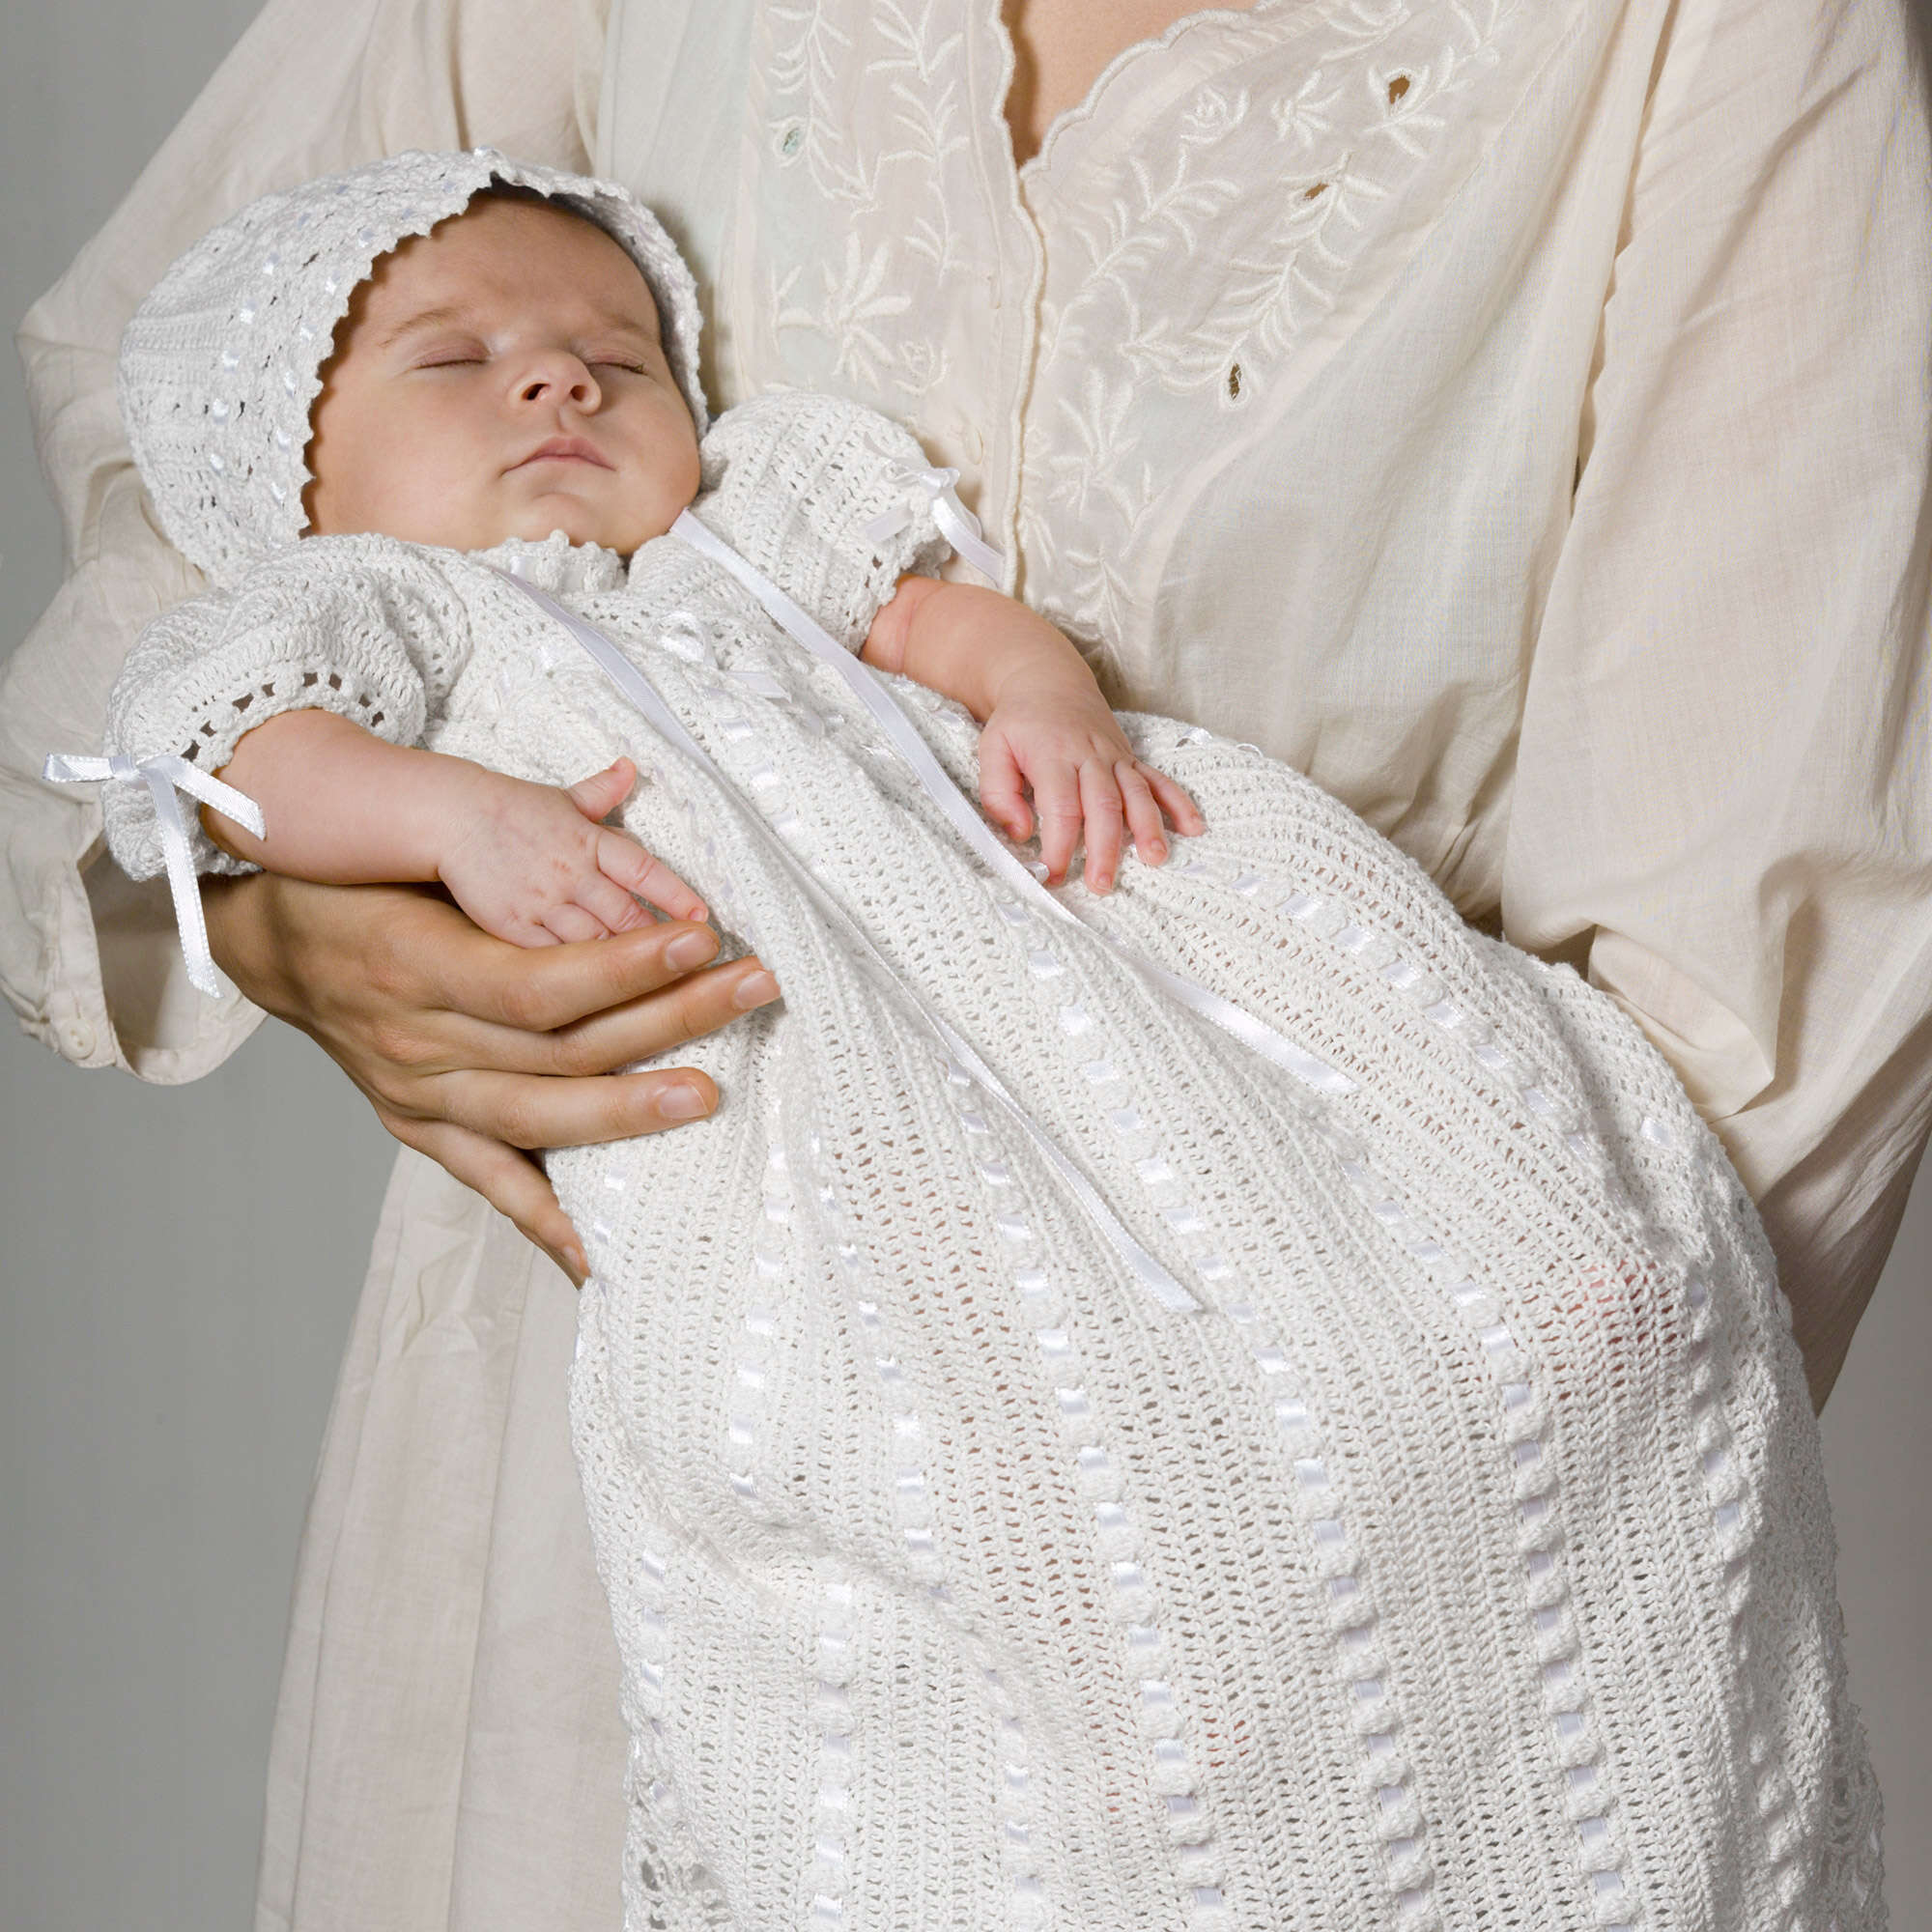 This Christening gown is missing something. But what? : r/crochet